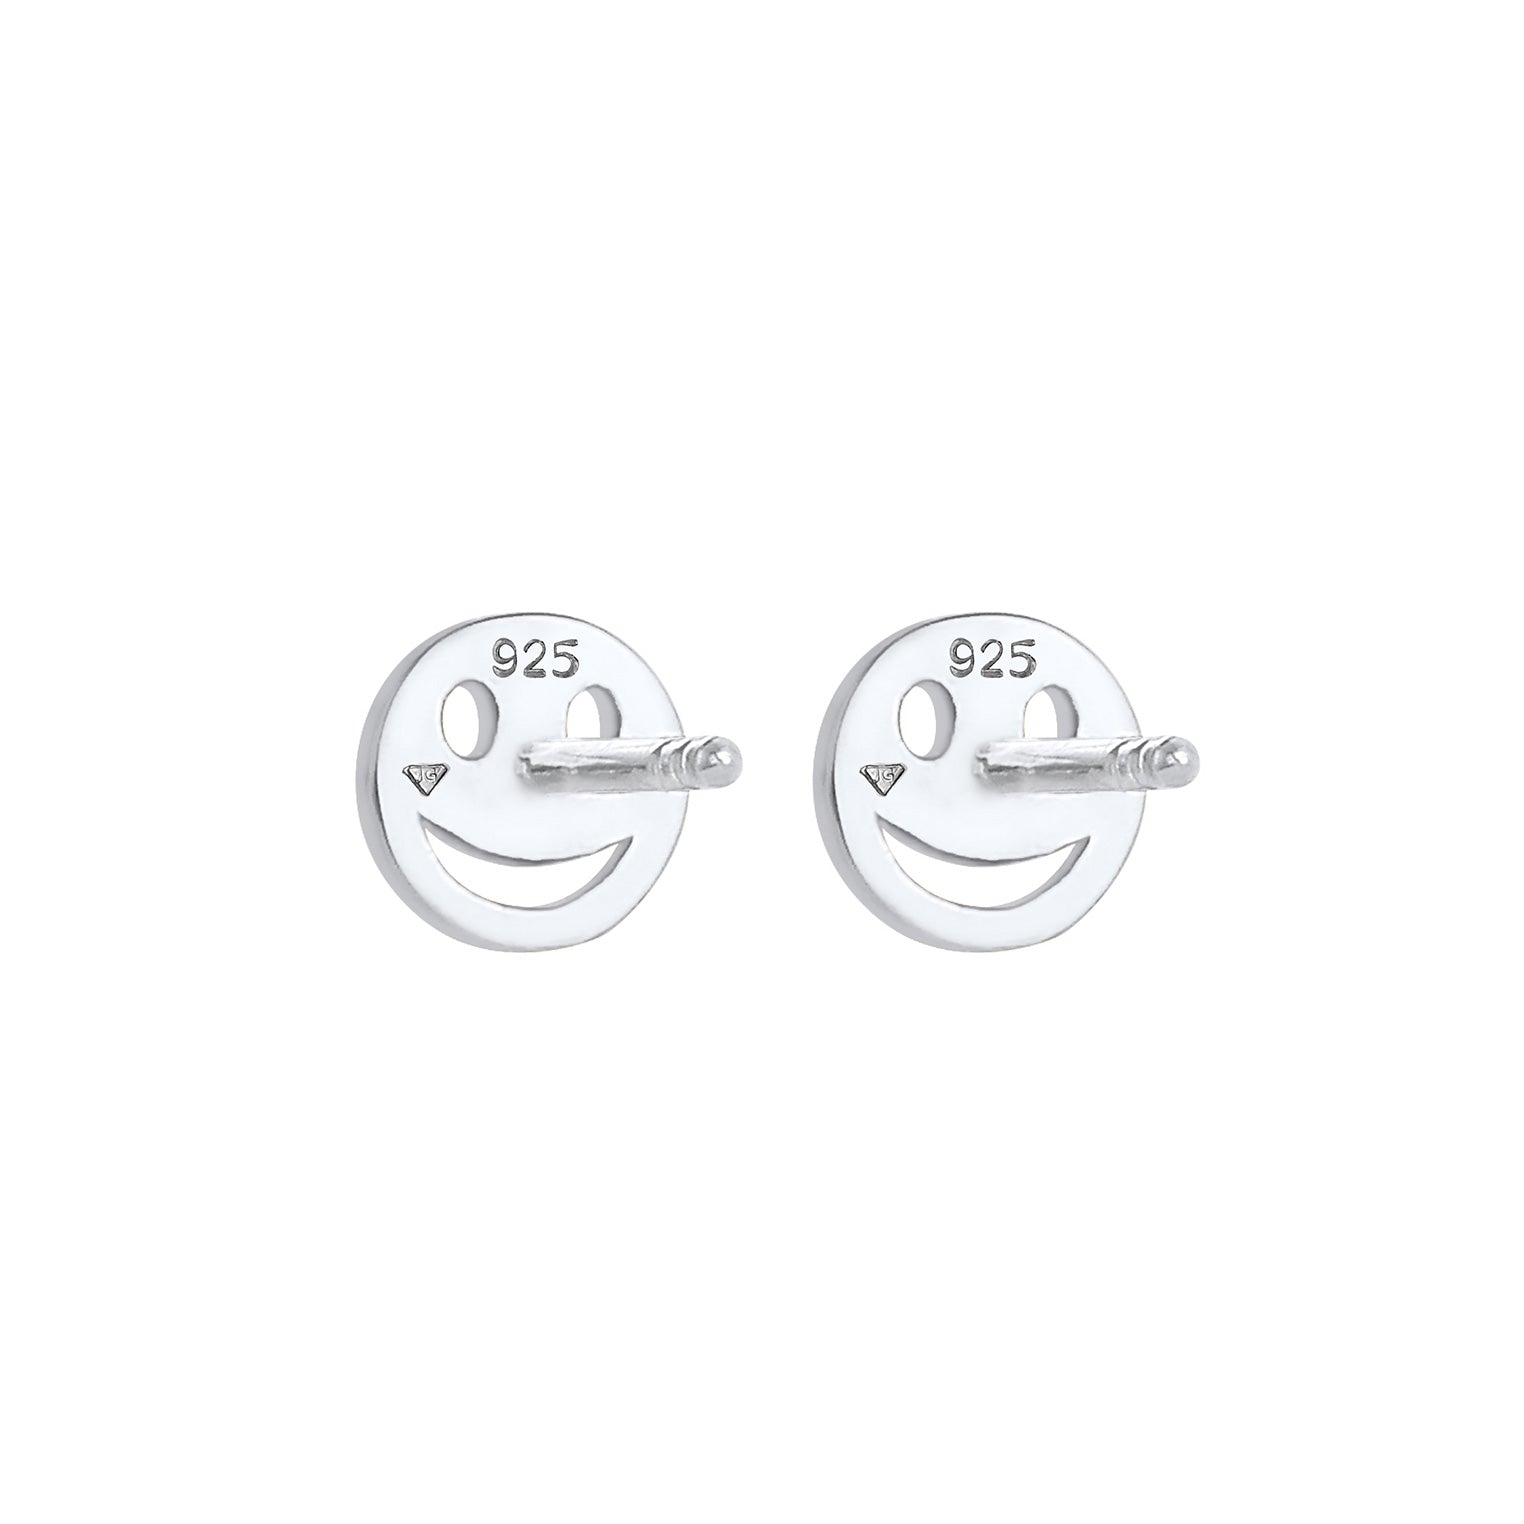 Ohrring mit Smiling Face – Elli Jewelry